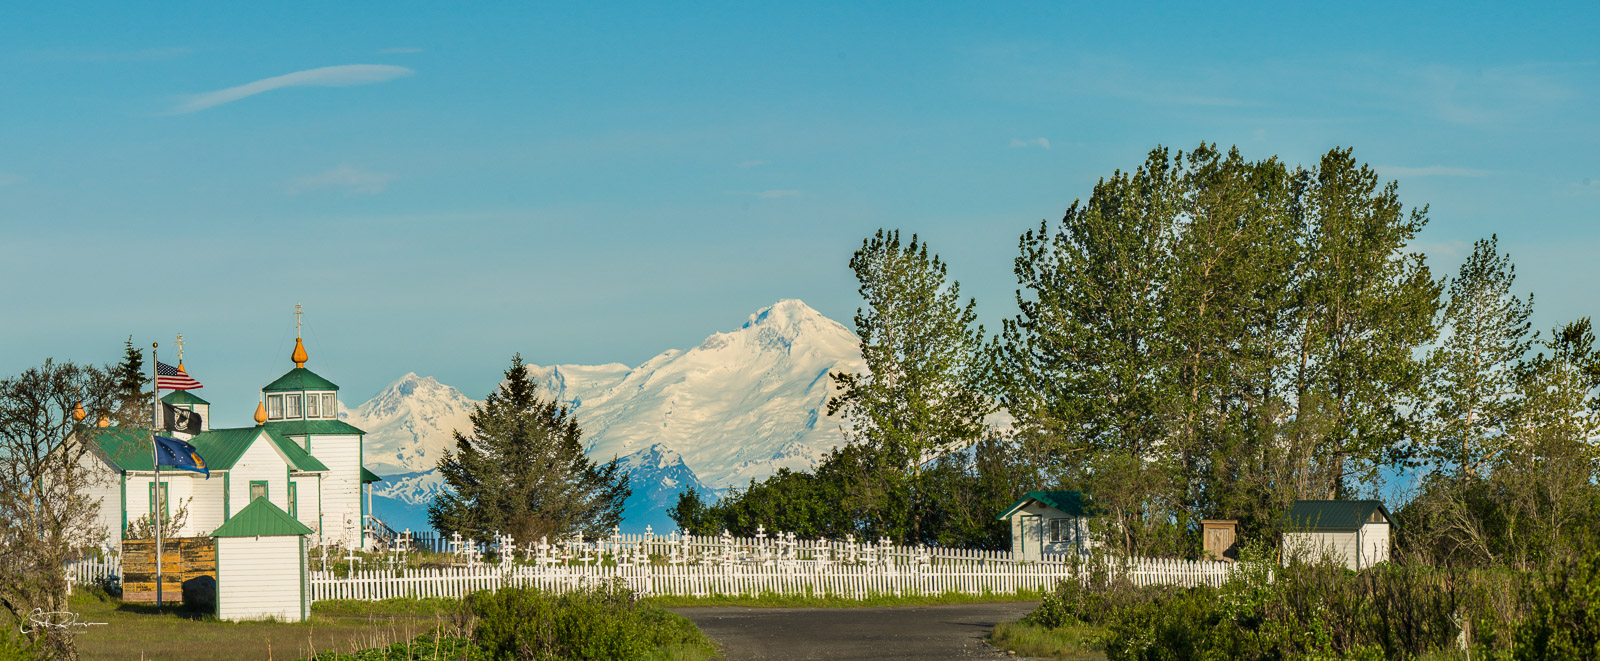 The Transfiguration of Our Lord Russian Orthodox Church in Ninlichik, Alaska, with Mt. Iliamna in the background.